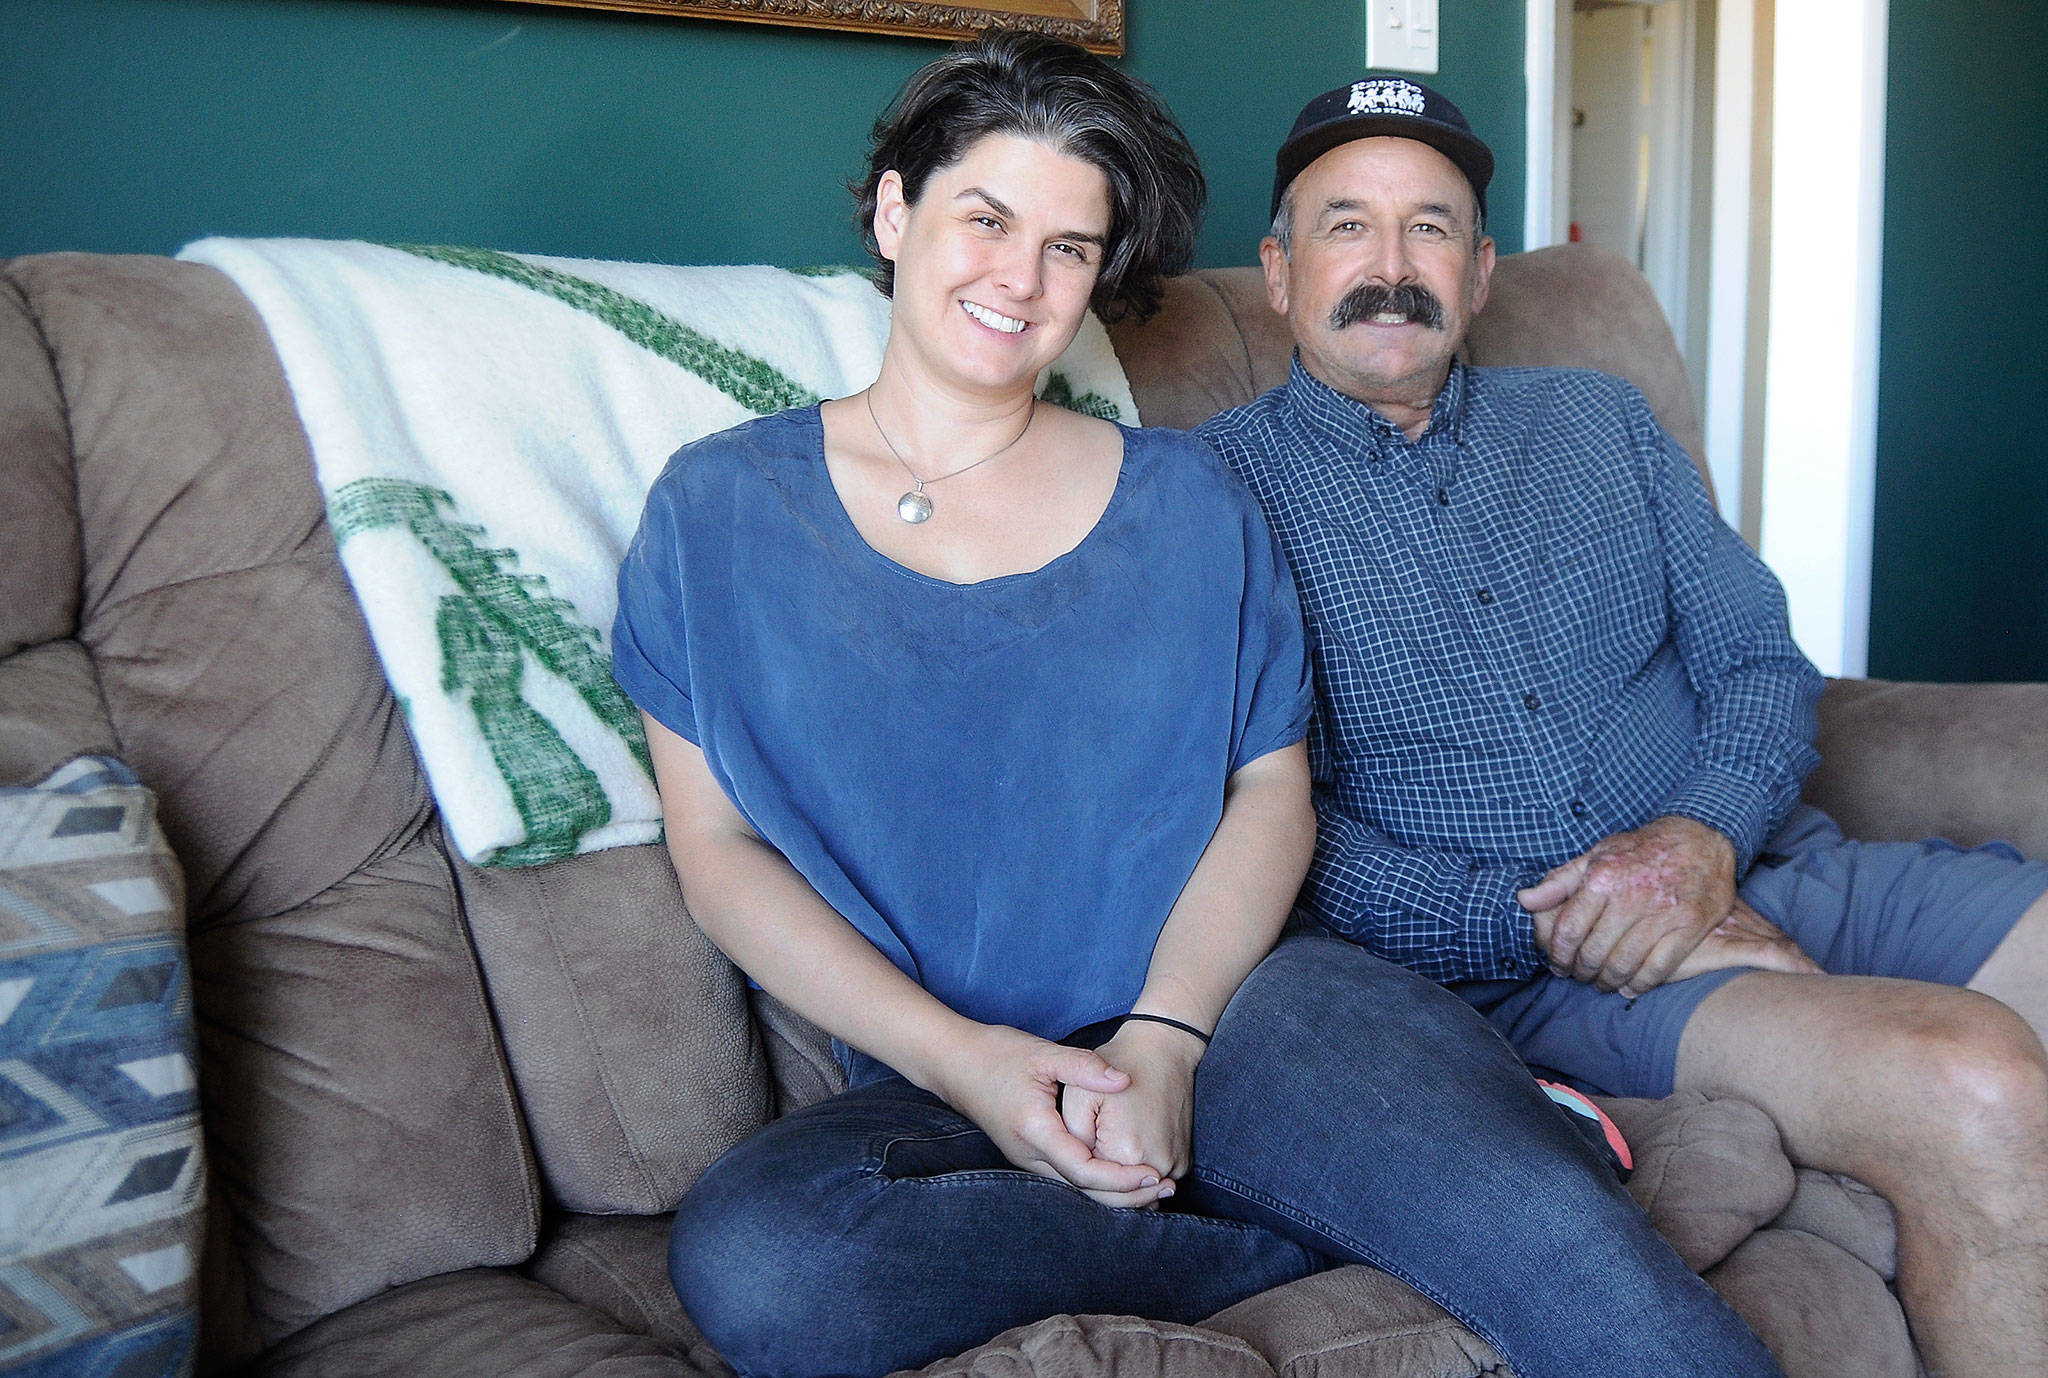 Rachel Mills joins her father Jerry Pino in his Sequim home last week. Mills and Pino for the first time earlier this year. Sequim Gazette photo by Michael Dashiell